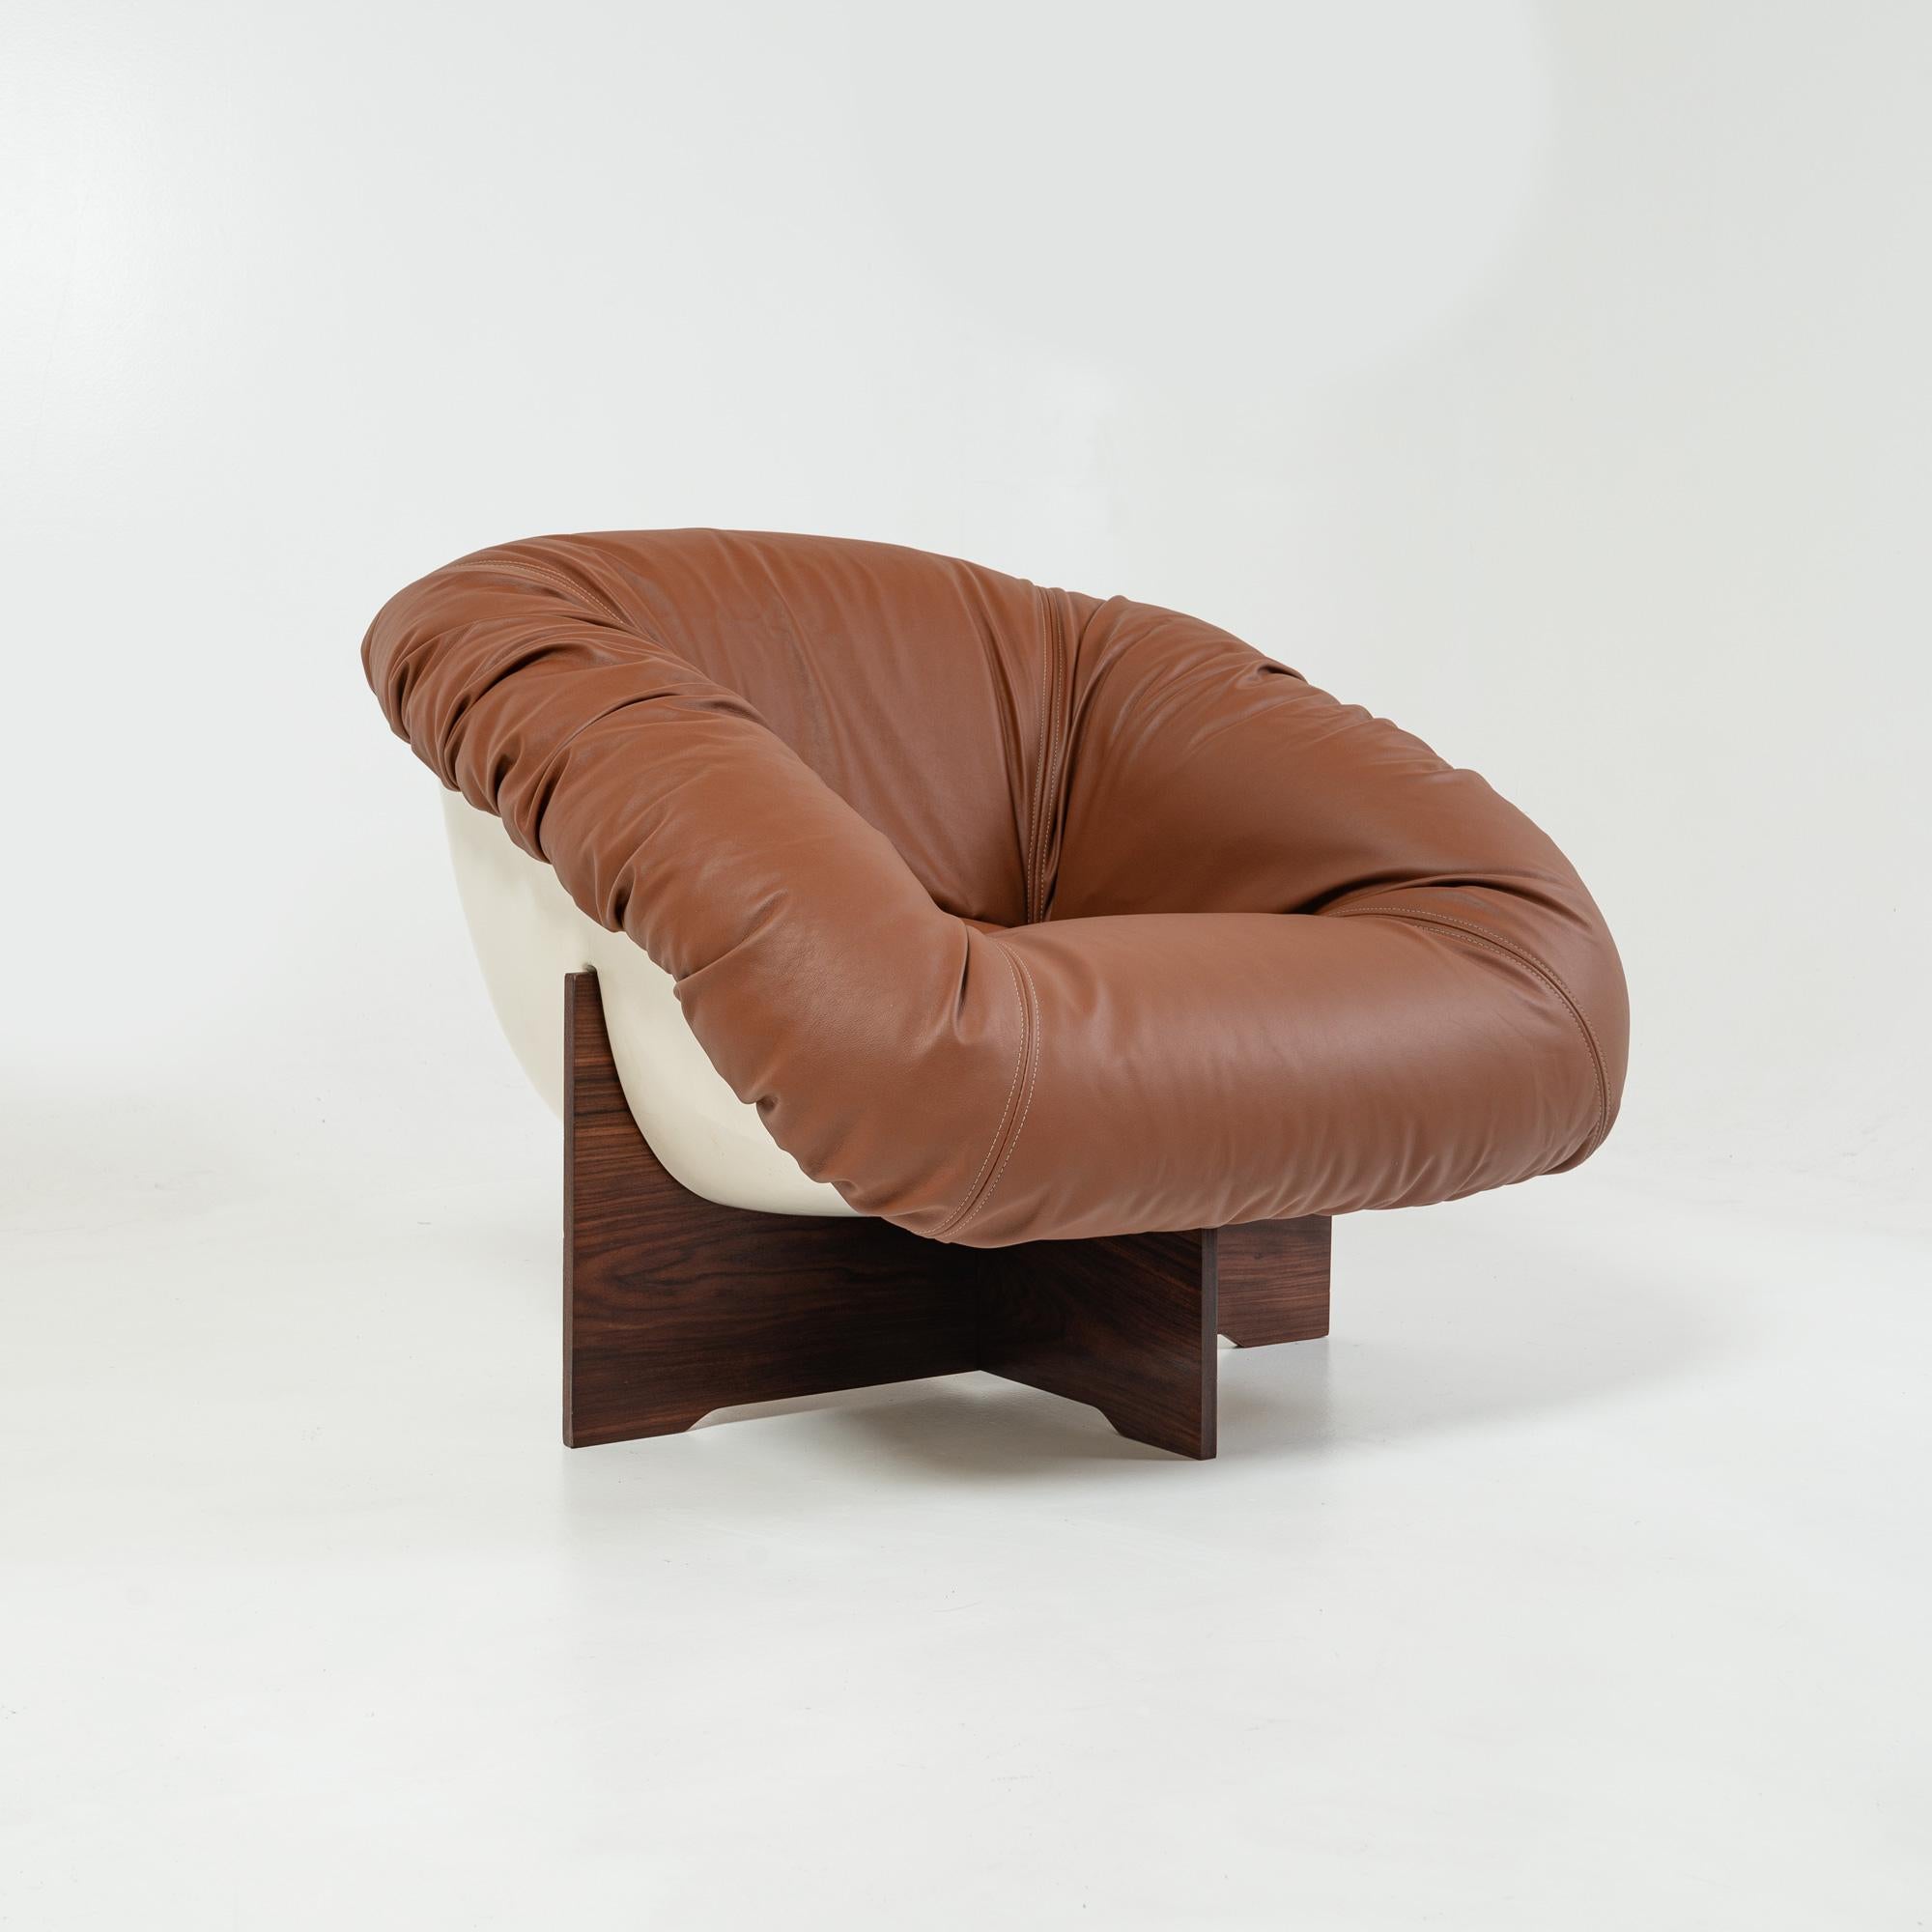 Post-Modern Percival Lafer's Lounge Chair model MP-61 in Maharam Leather and Rosewood, 1973 For Sale